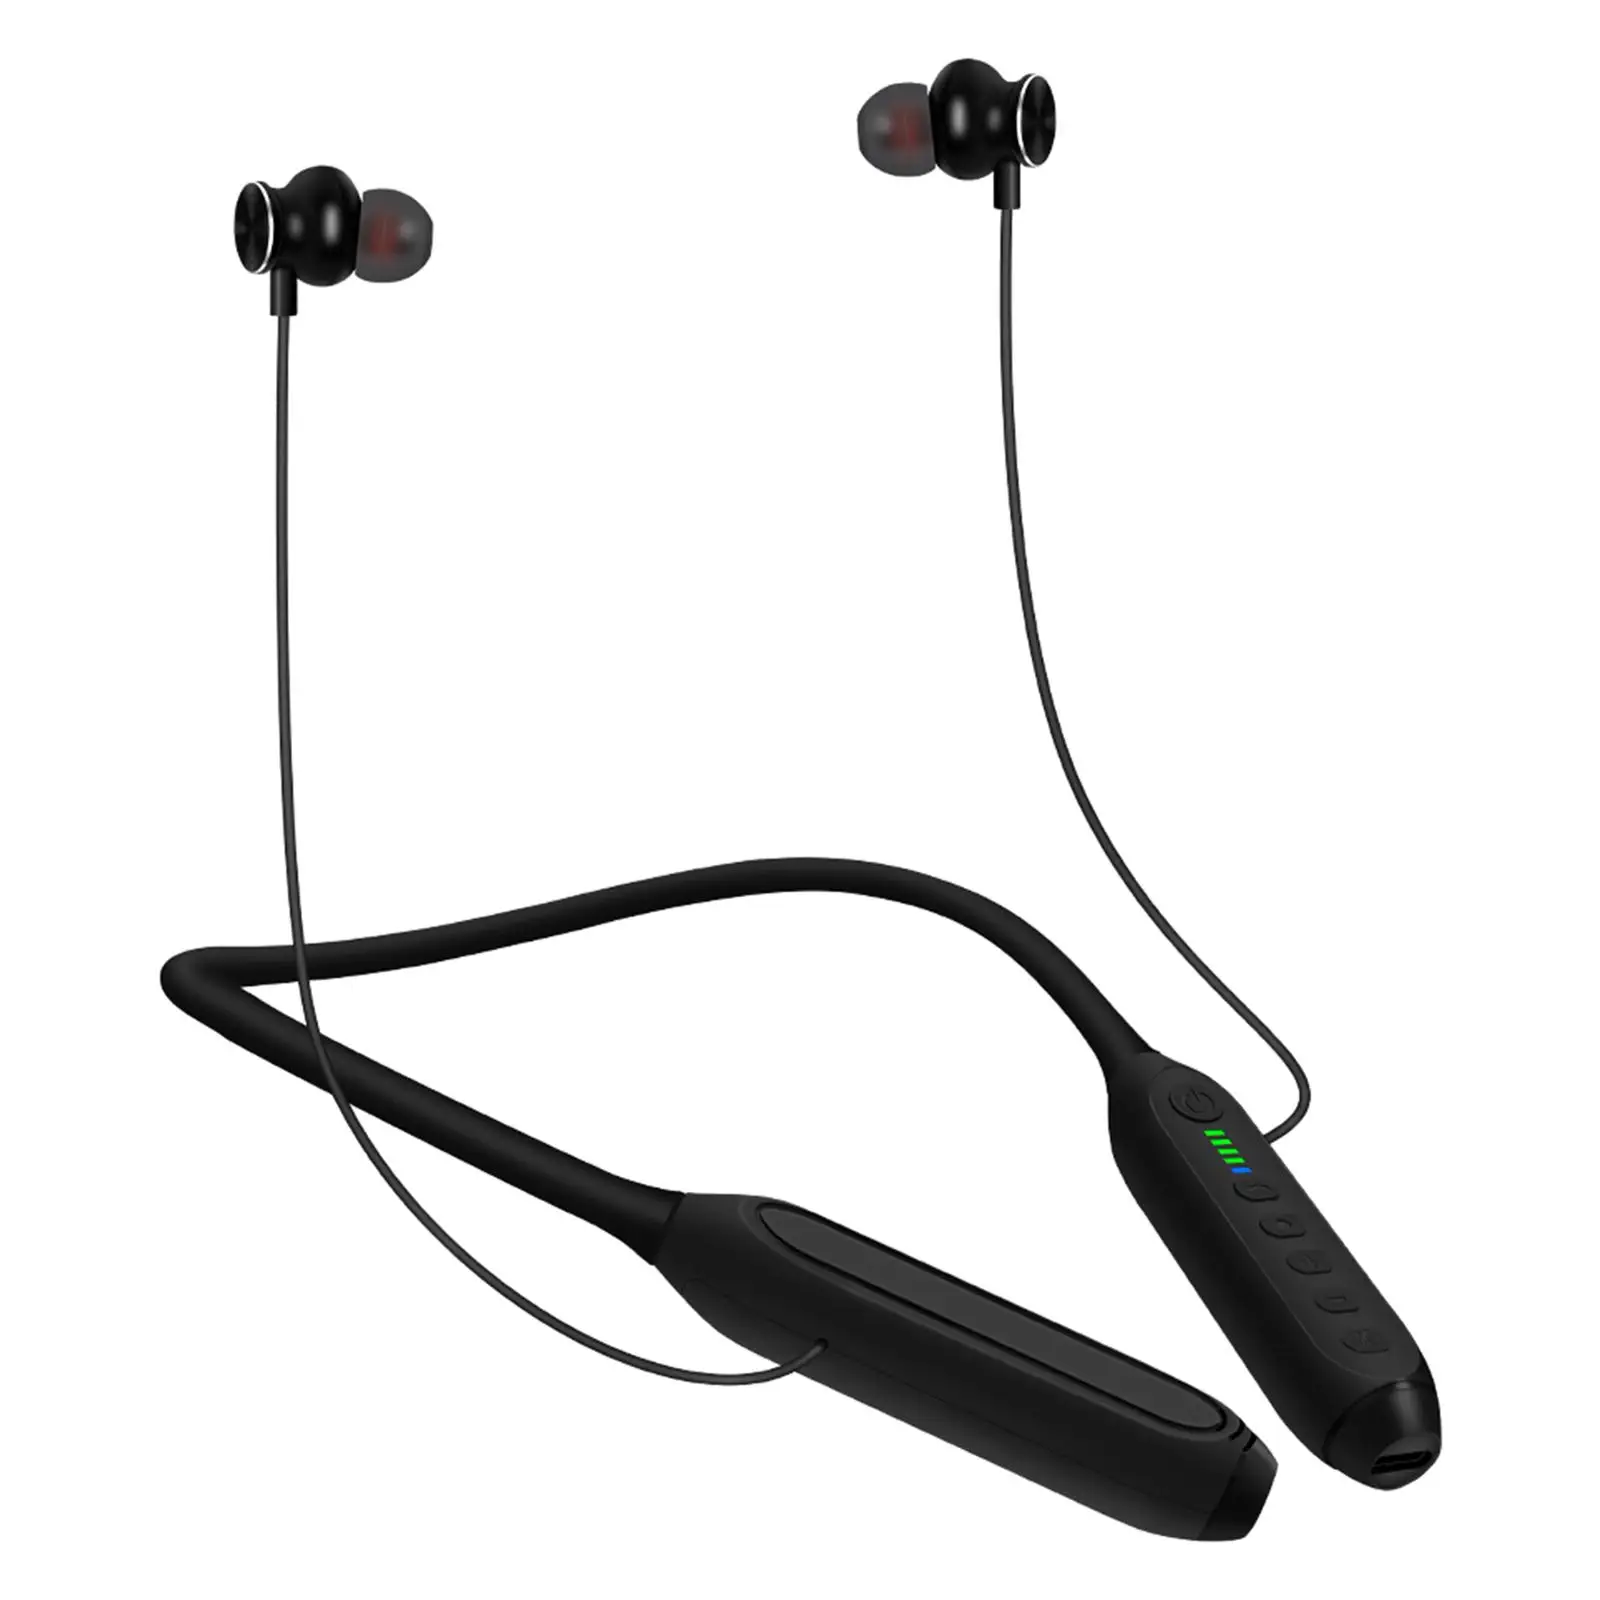 Neckband Bluetooth Headphones HD Stereo 100H Playtime for Clear Calls Work Music Magnetic Earbuds Wireless Headset for Office